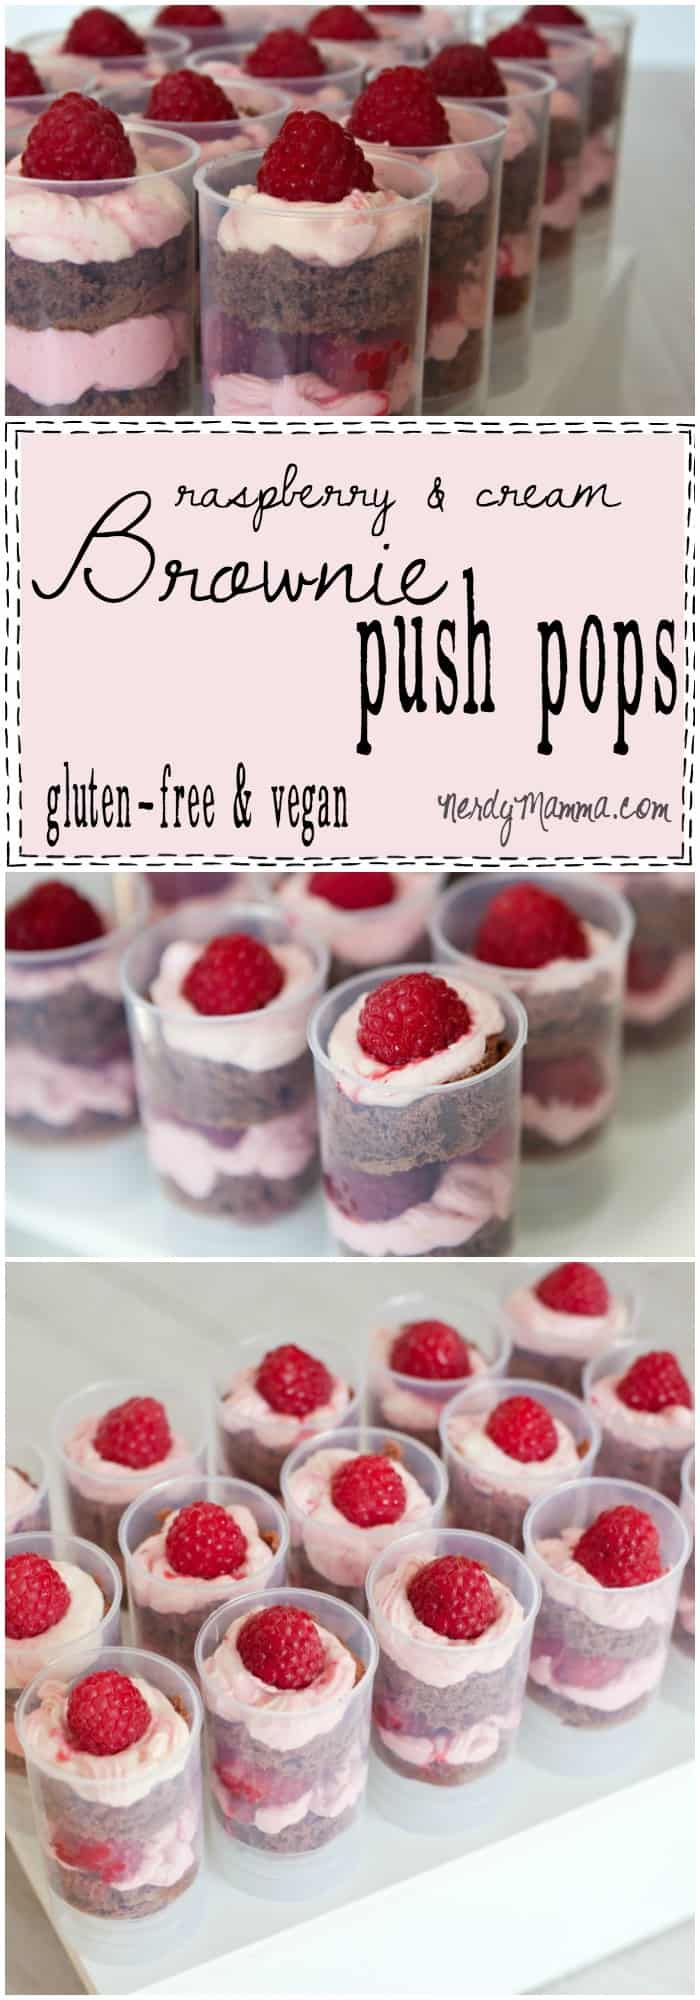 Oh my gosh, I LOVE this recipe for Gluten-Free & Vegan Raspberry and Cream Brownie Push Pops...So easy, looks so very yummy. I just need.